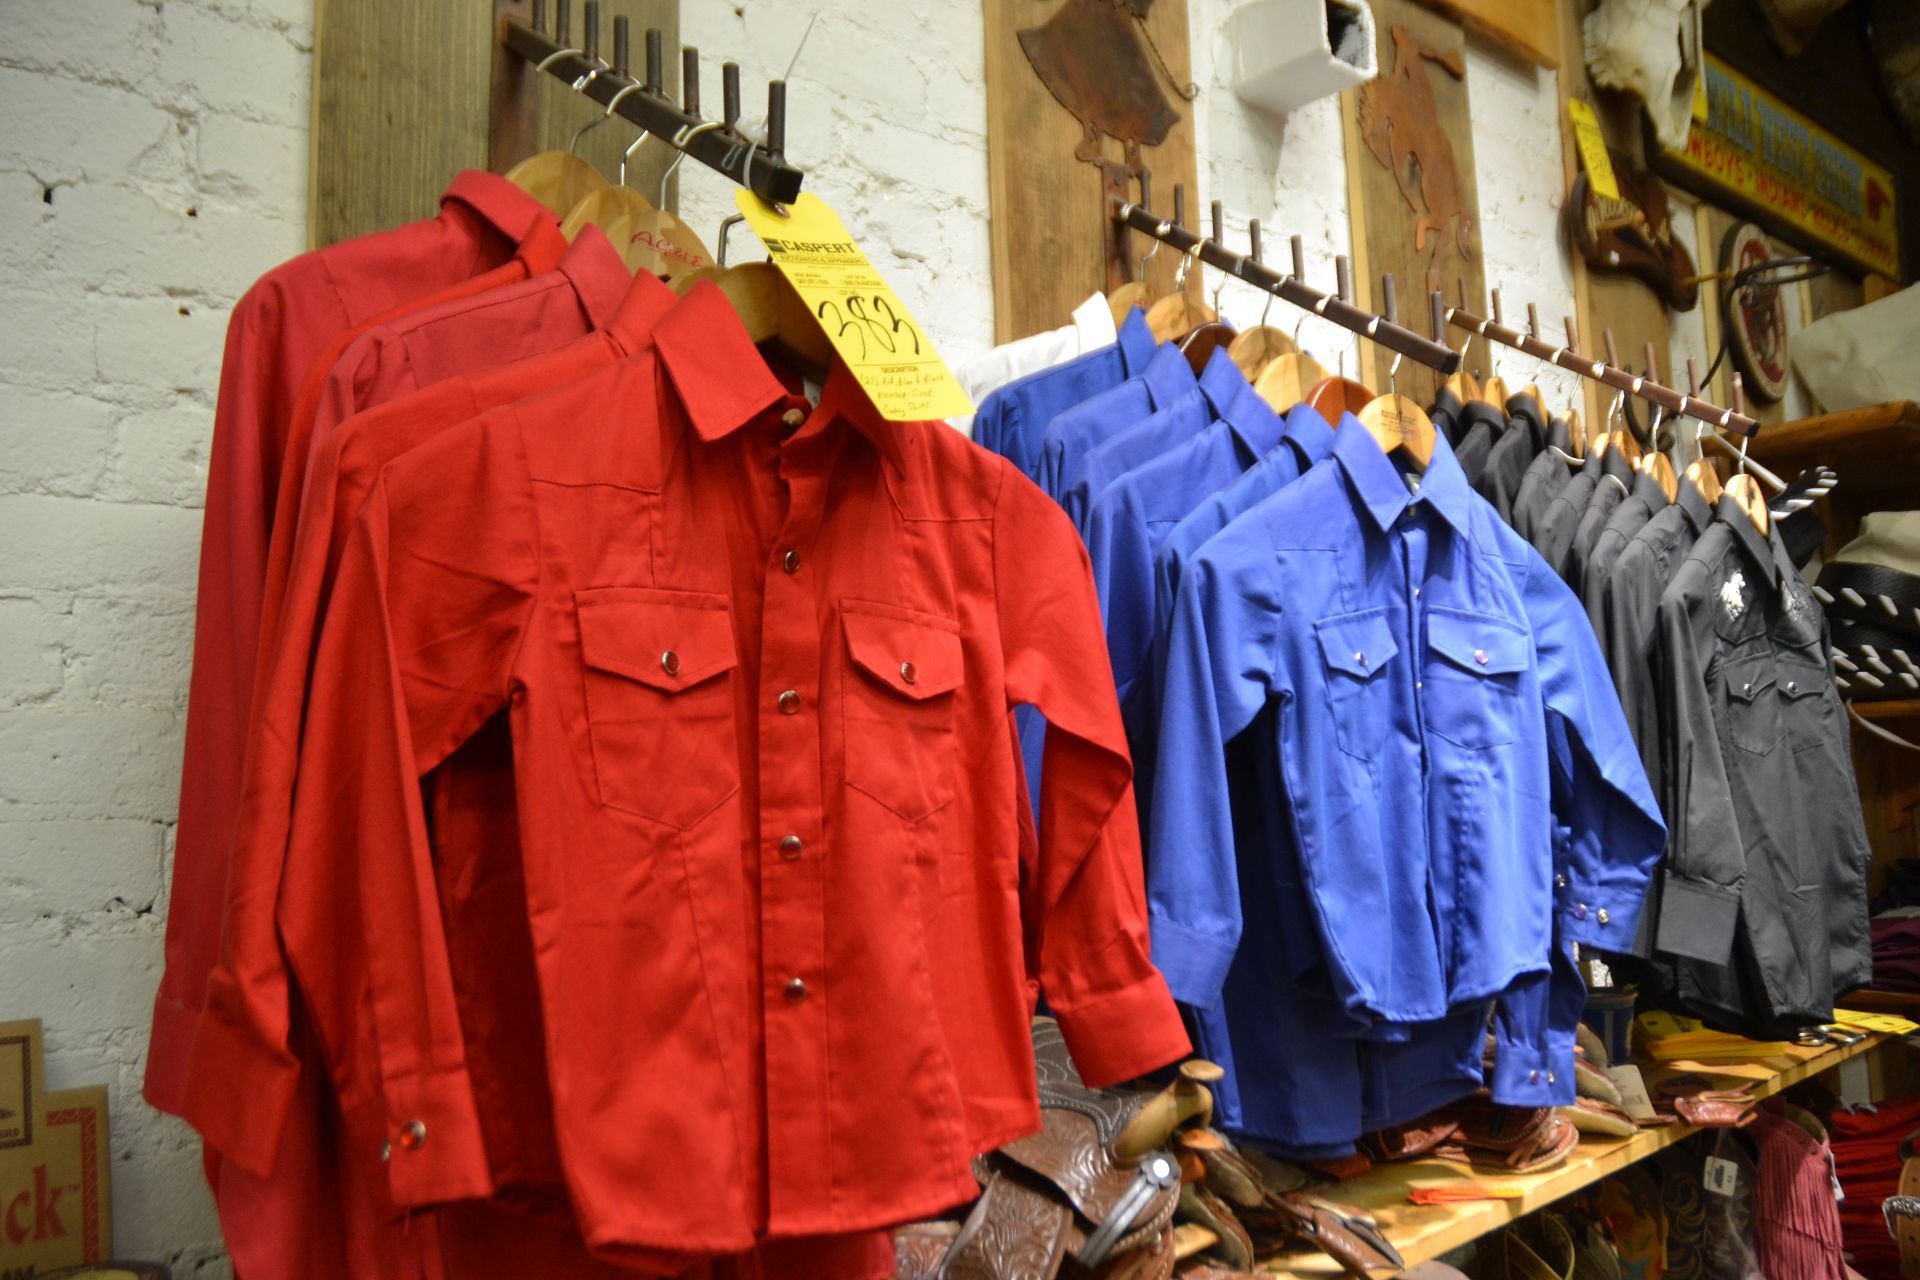 Assorted Sized and Colored Children's Cowboys Shirts